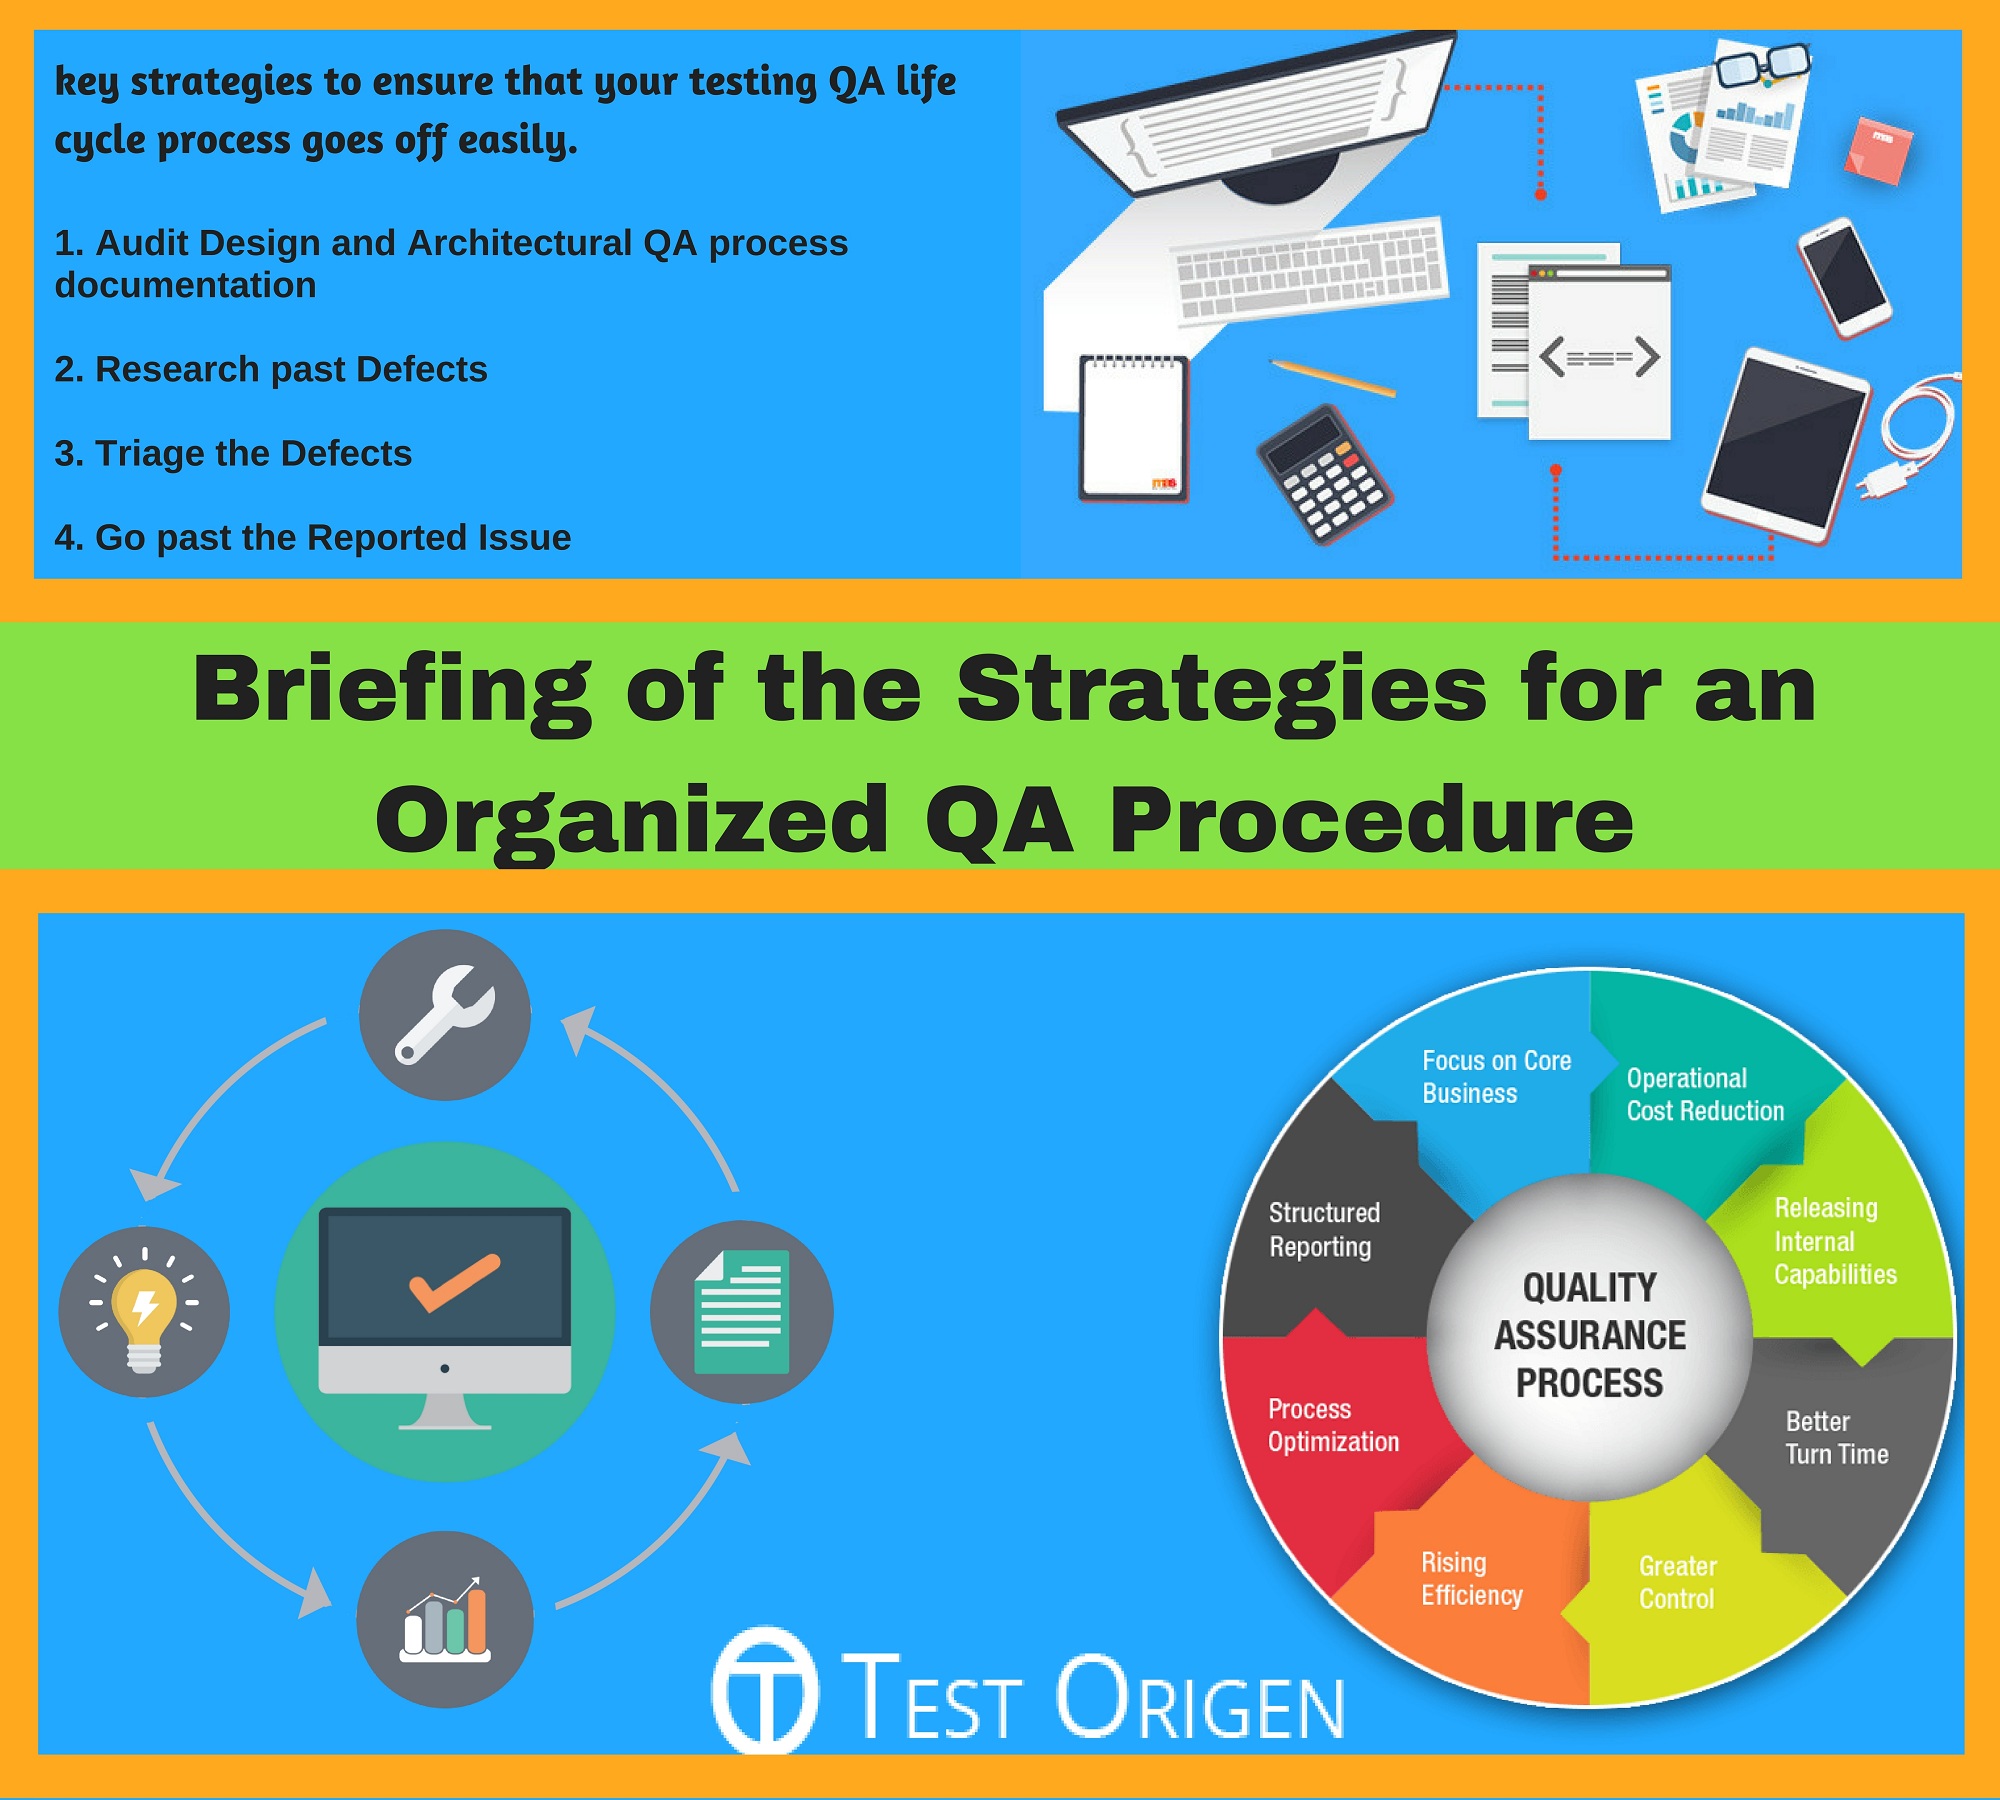 Briefing of the Strategies for an Organized QA Procedure